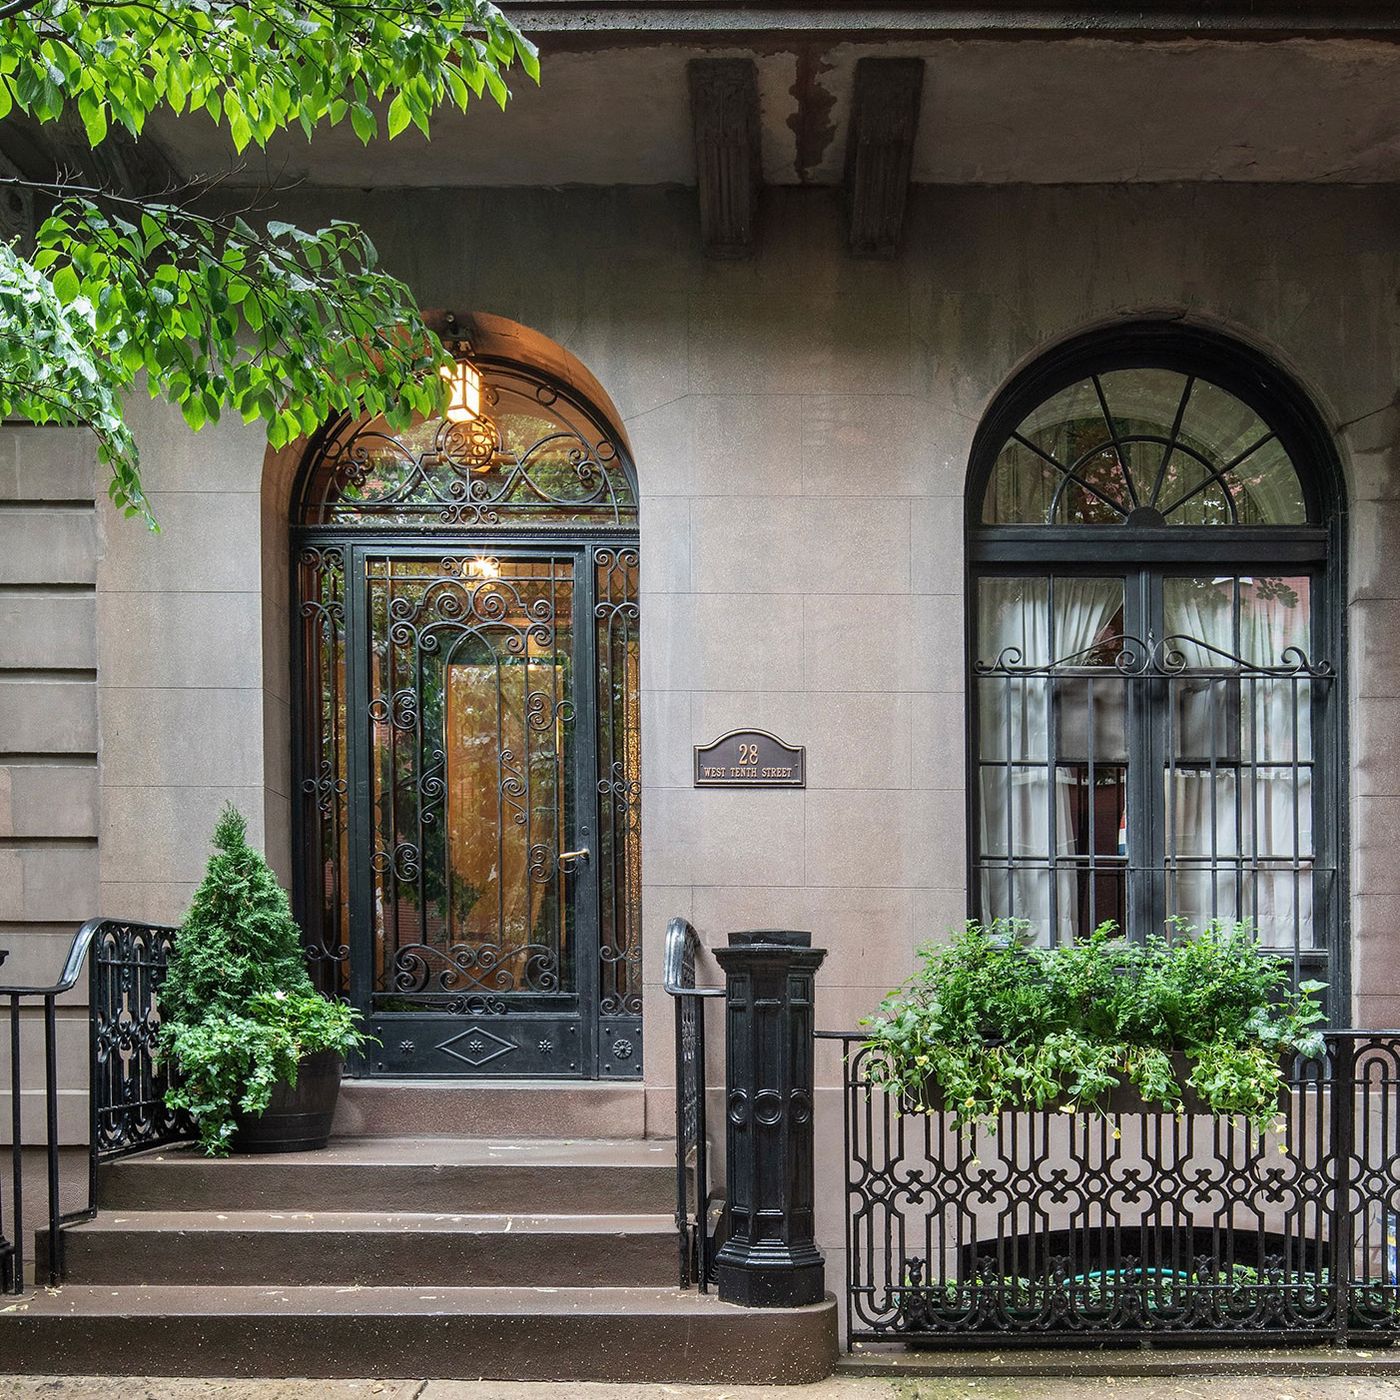 Mel Gussow's Village Row House at 28 West 10th Street